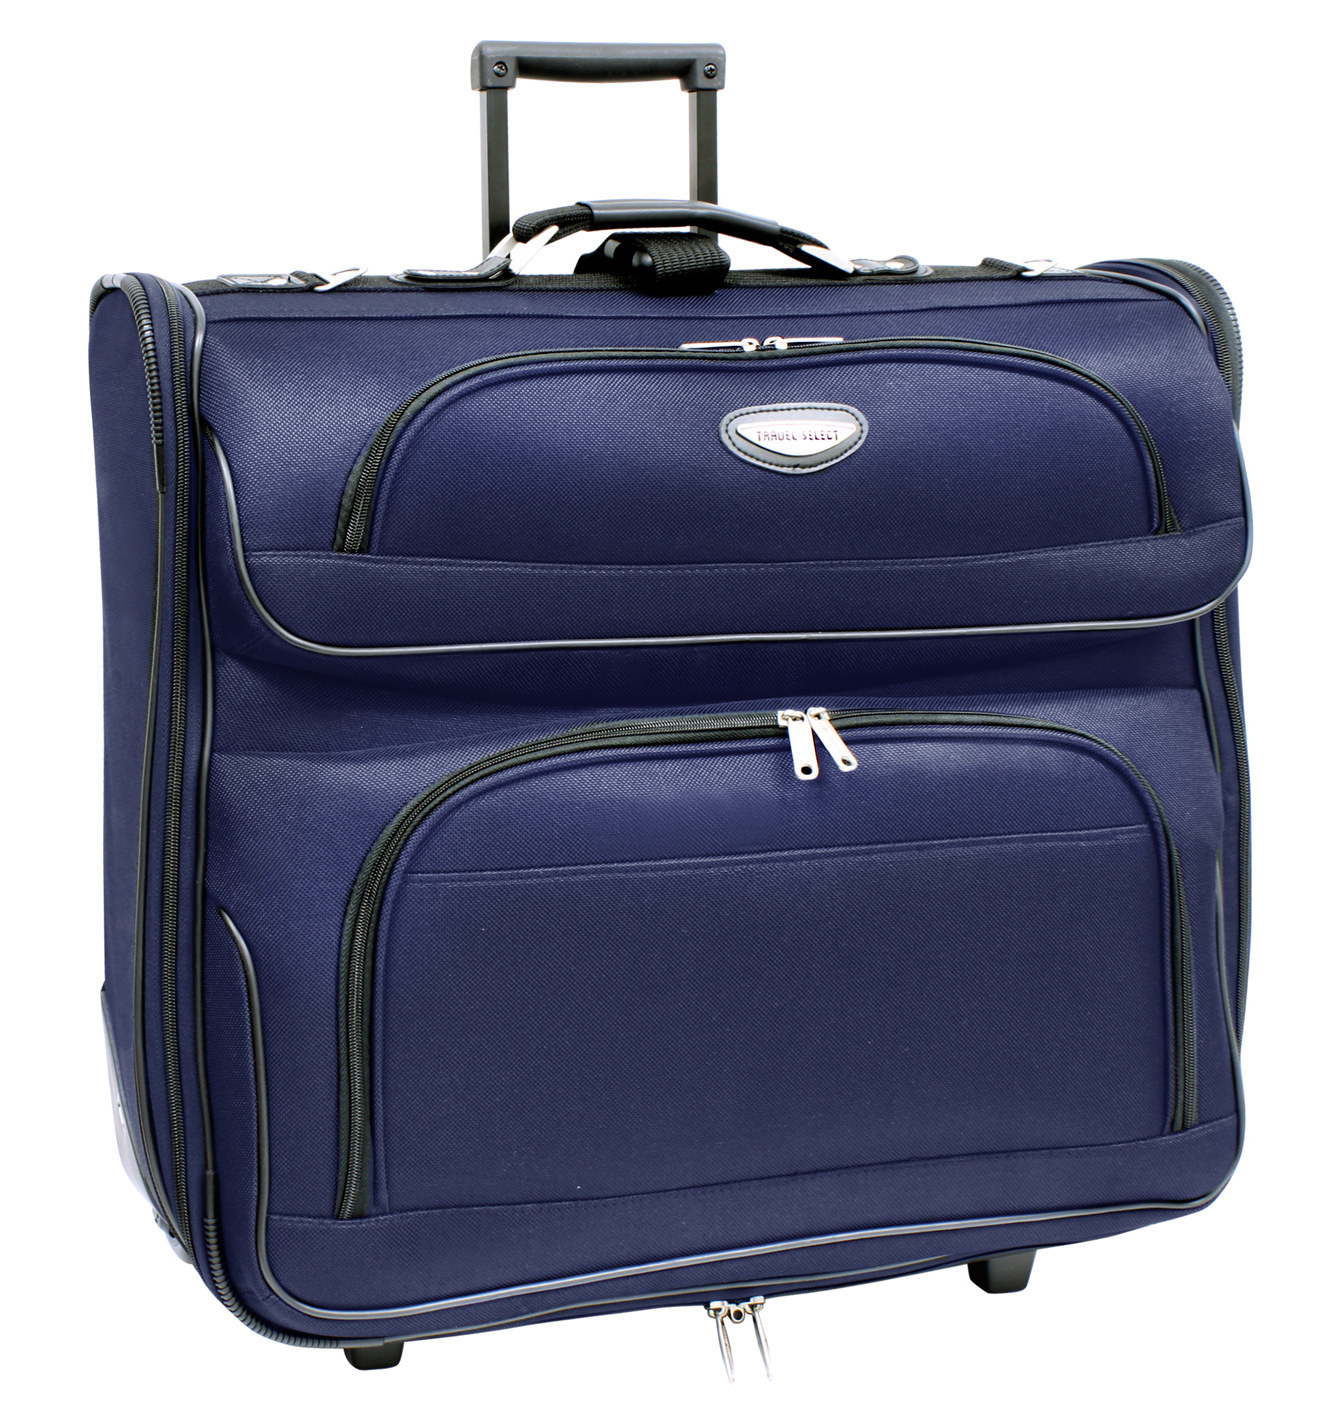 25 Of The Best Carry-On Bags At Walmart